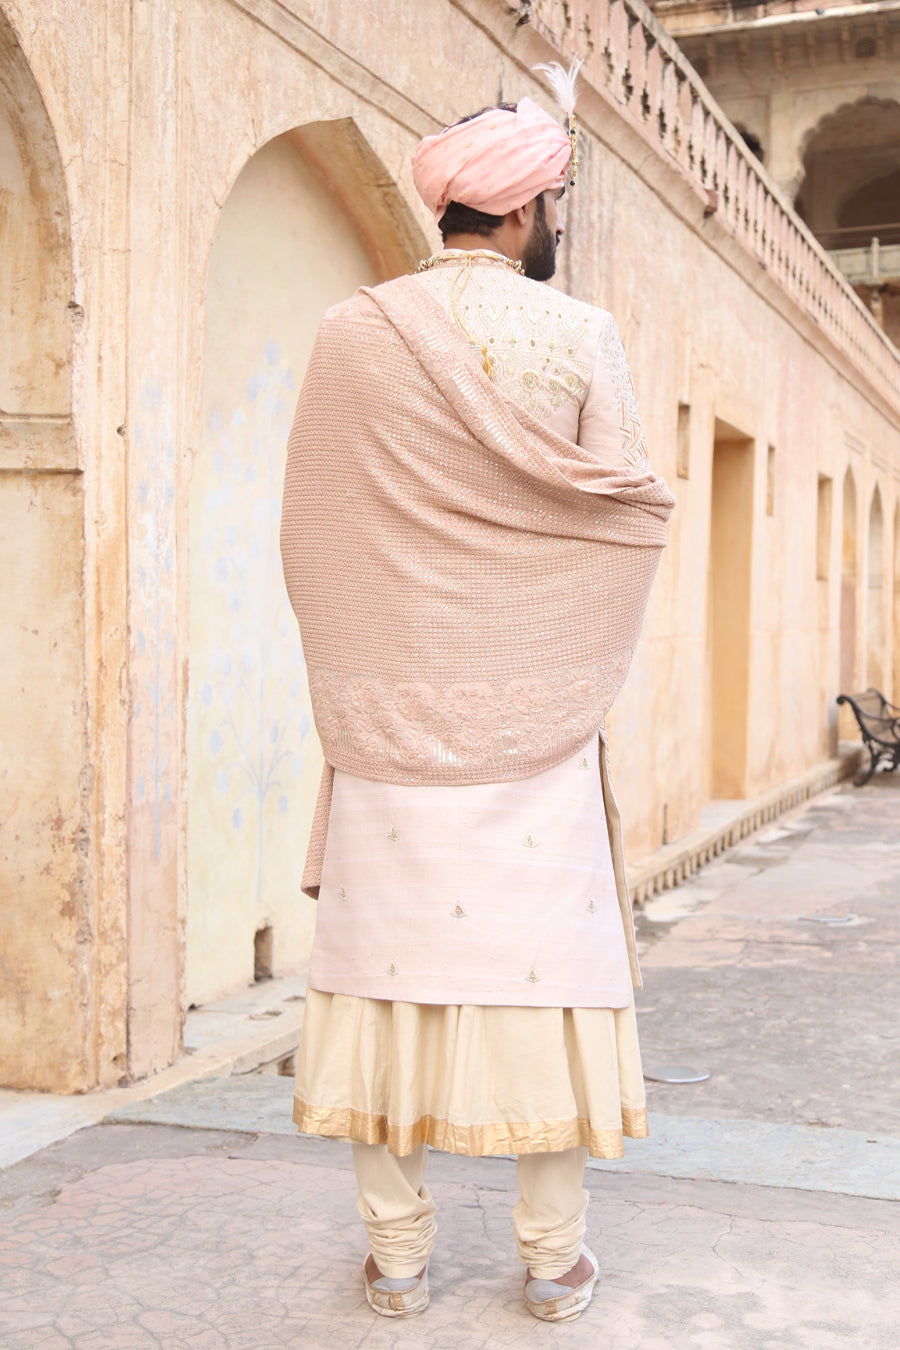 Sherwani Matched With Nude Pink Coloured Stole And Other Accessories